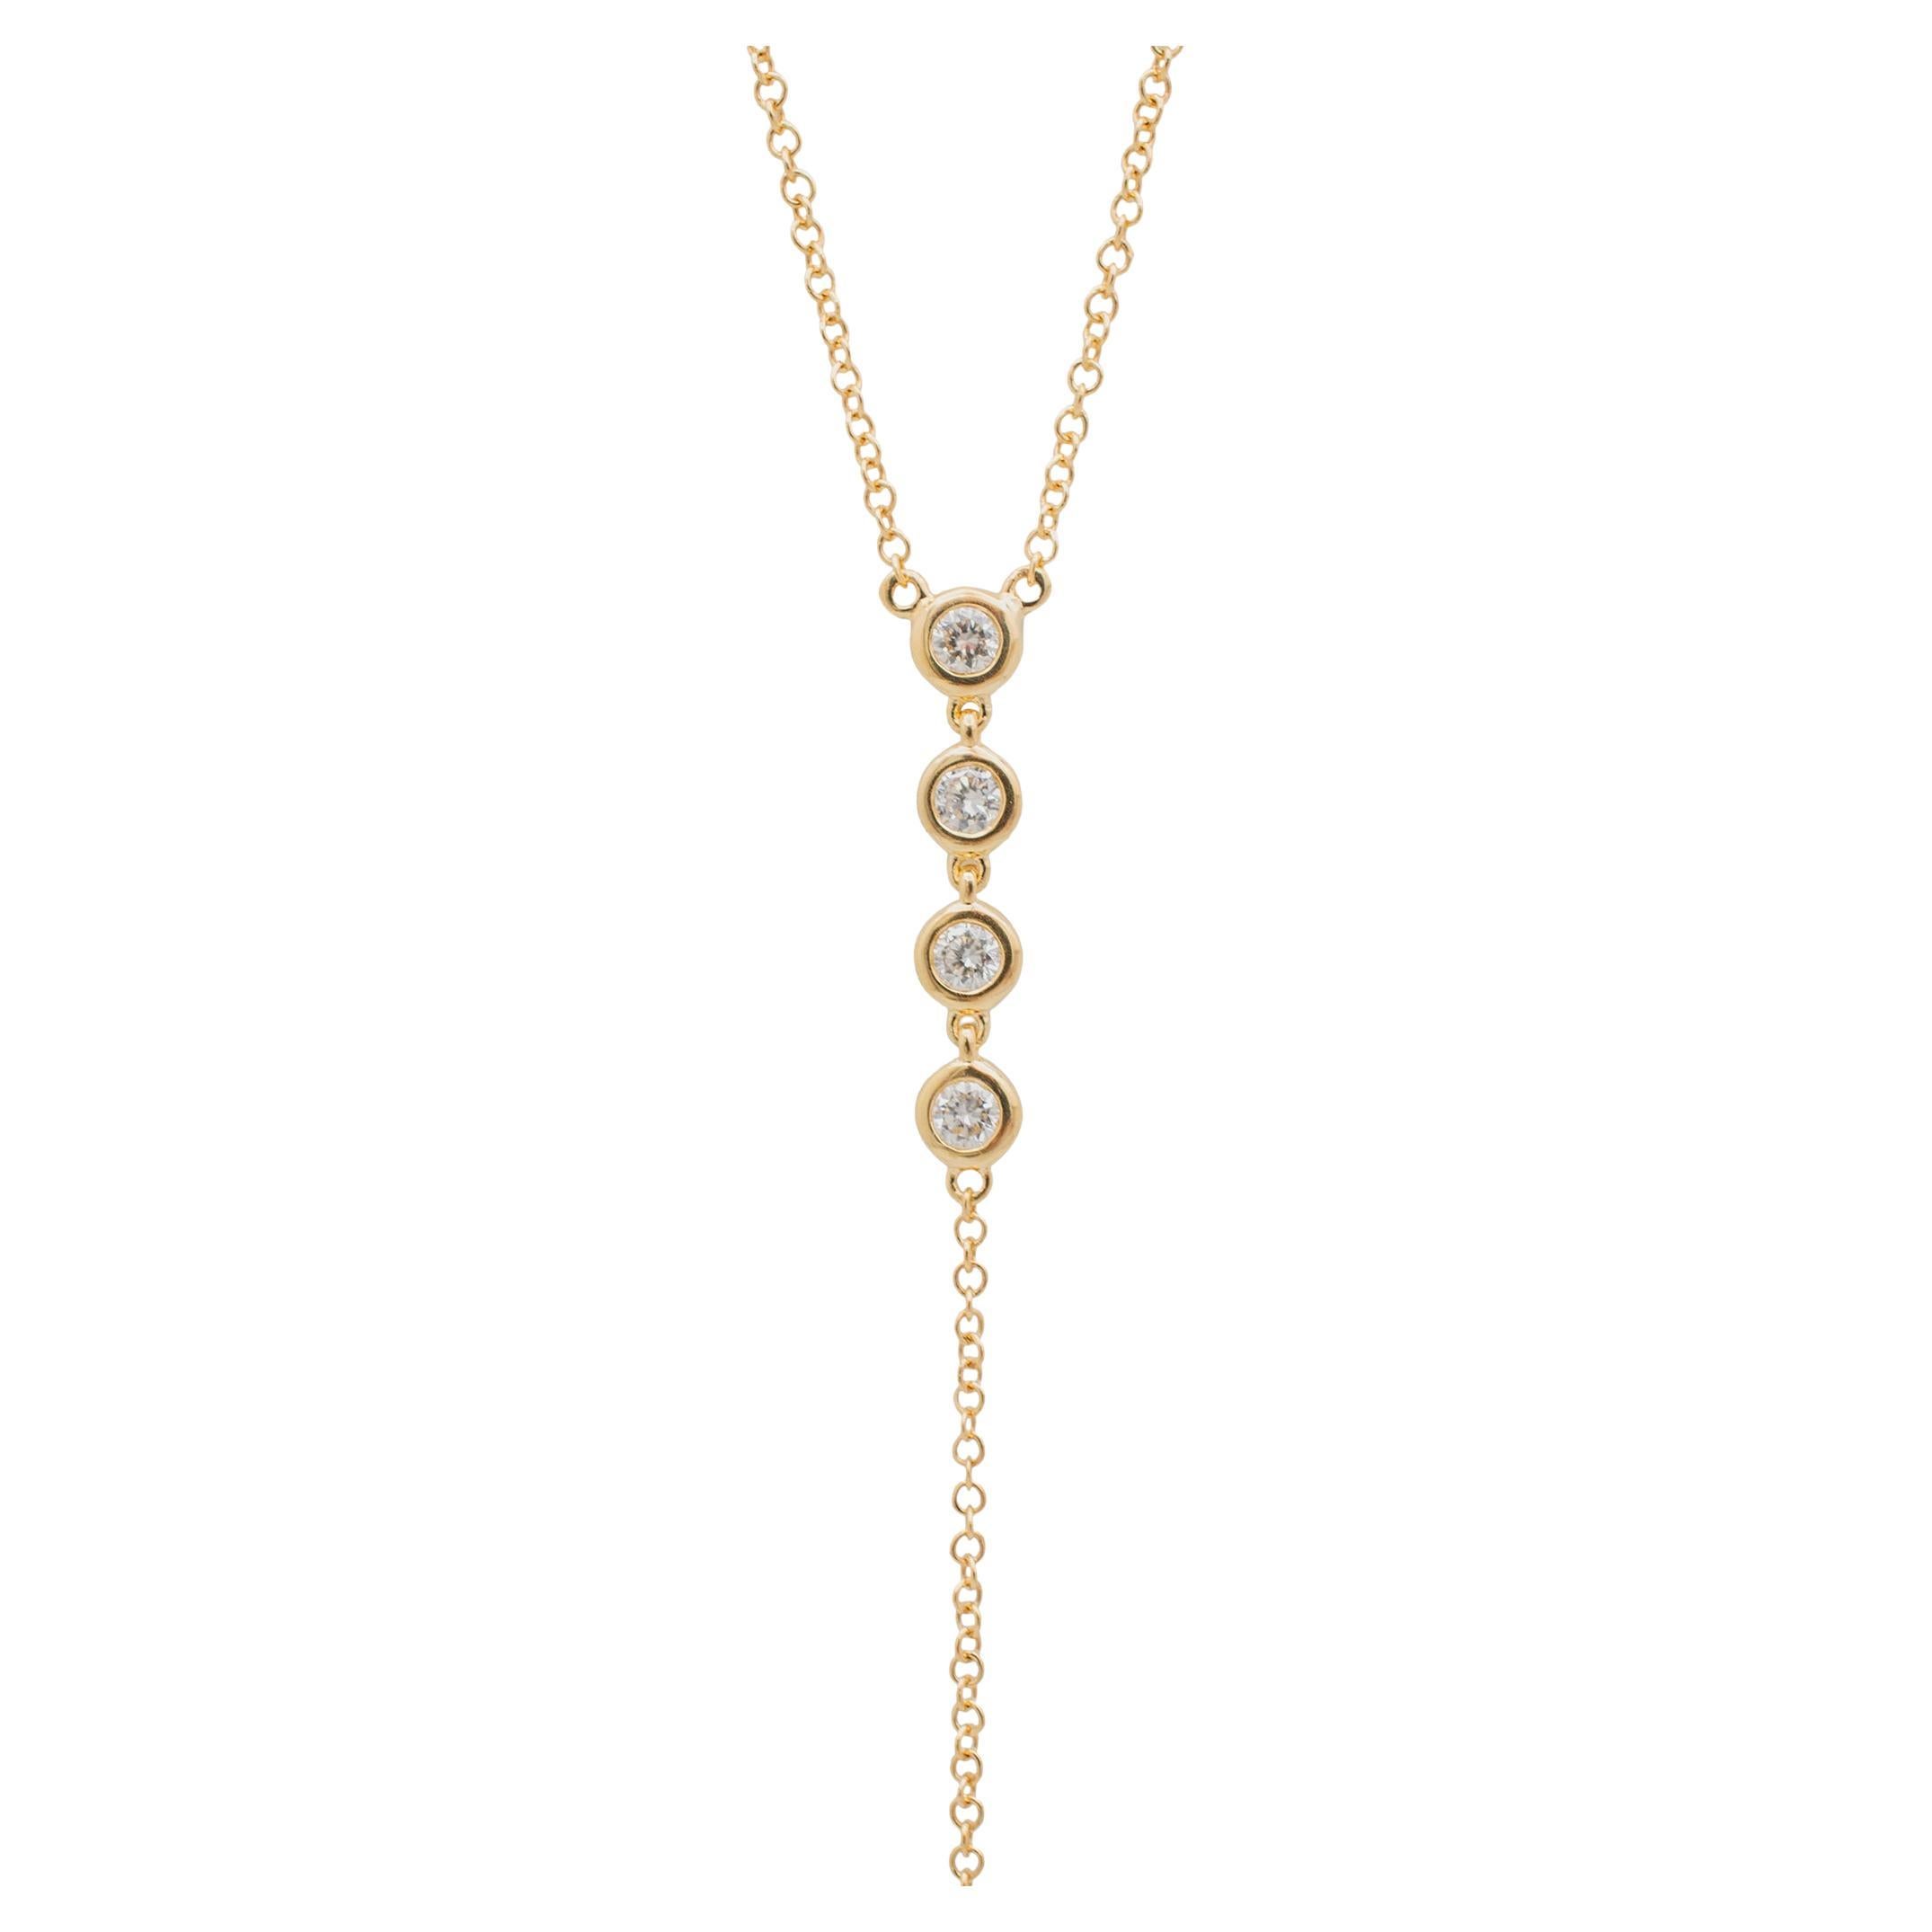 Gender: Ladies

Metal Type: 14K Yellow Gold

Length: 18.00 inches

Width: 1.15 mm

Weight: 1.97 grams

Ladies 14K yellow gold single strand collar, diamond station necklace. The metal was tested and determined to be 14K yellow gold. Engraved with